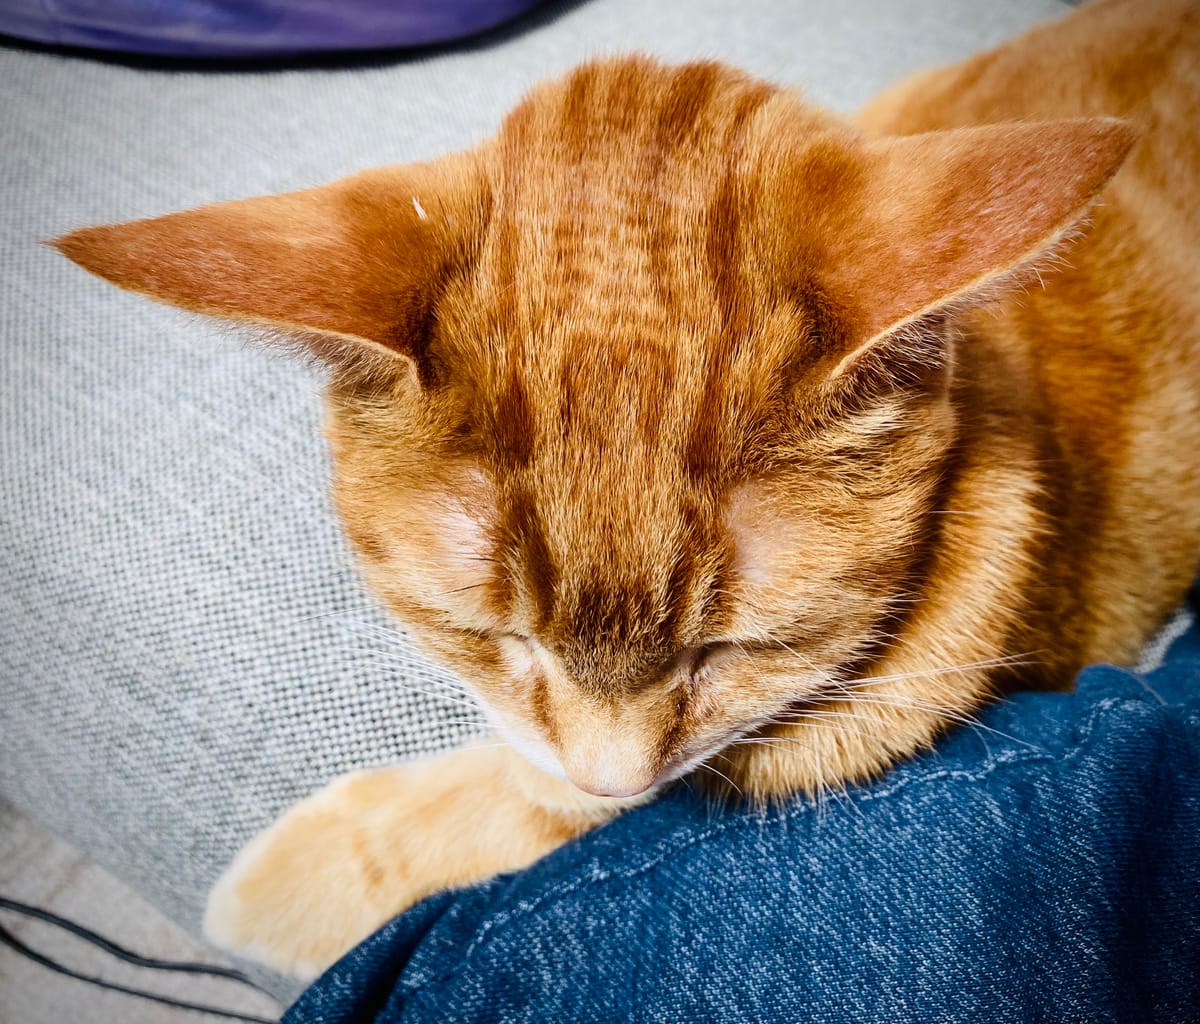 The top of an orange tabby’s head, showing a small patch of horizontally striped fur between his ears